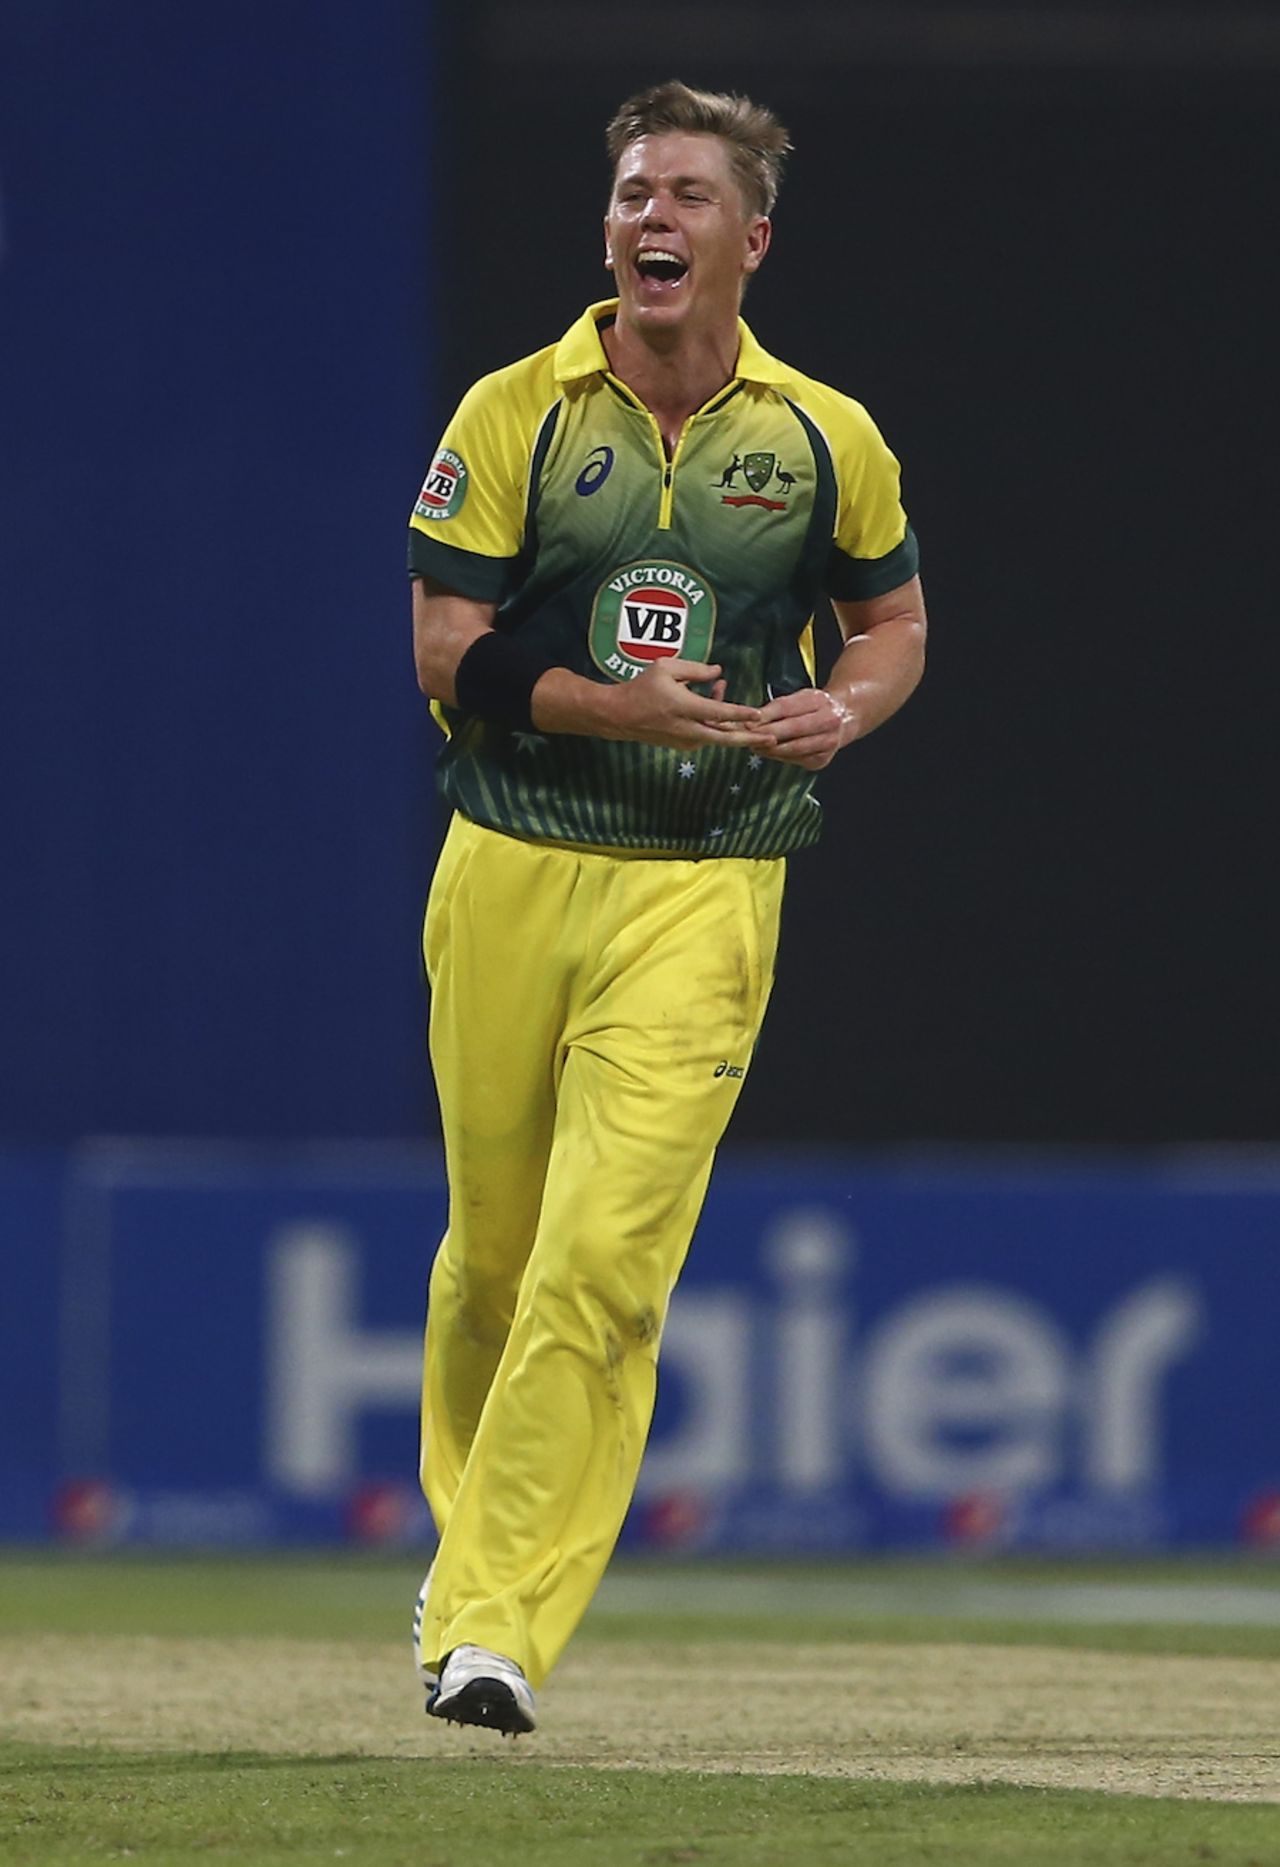 Xavier Doherty is thrilled after taking a wicket, Pakistan v Australia, 3rd ODI, Abu Dhabi, October 12, 2014